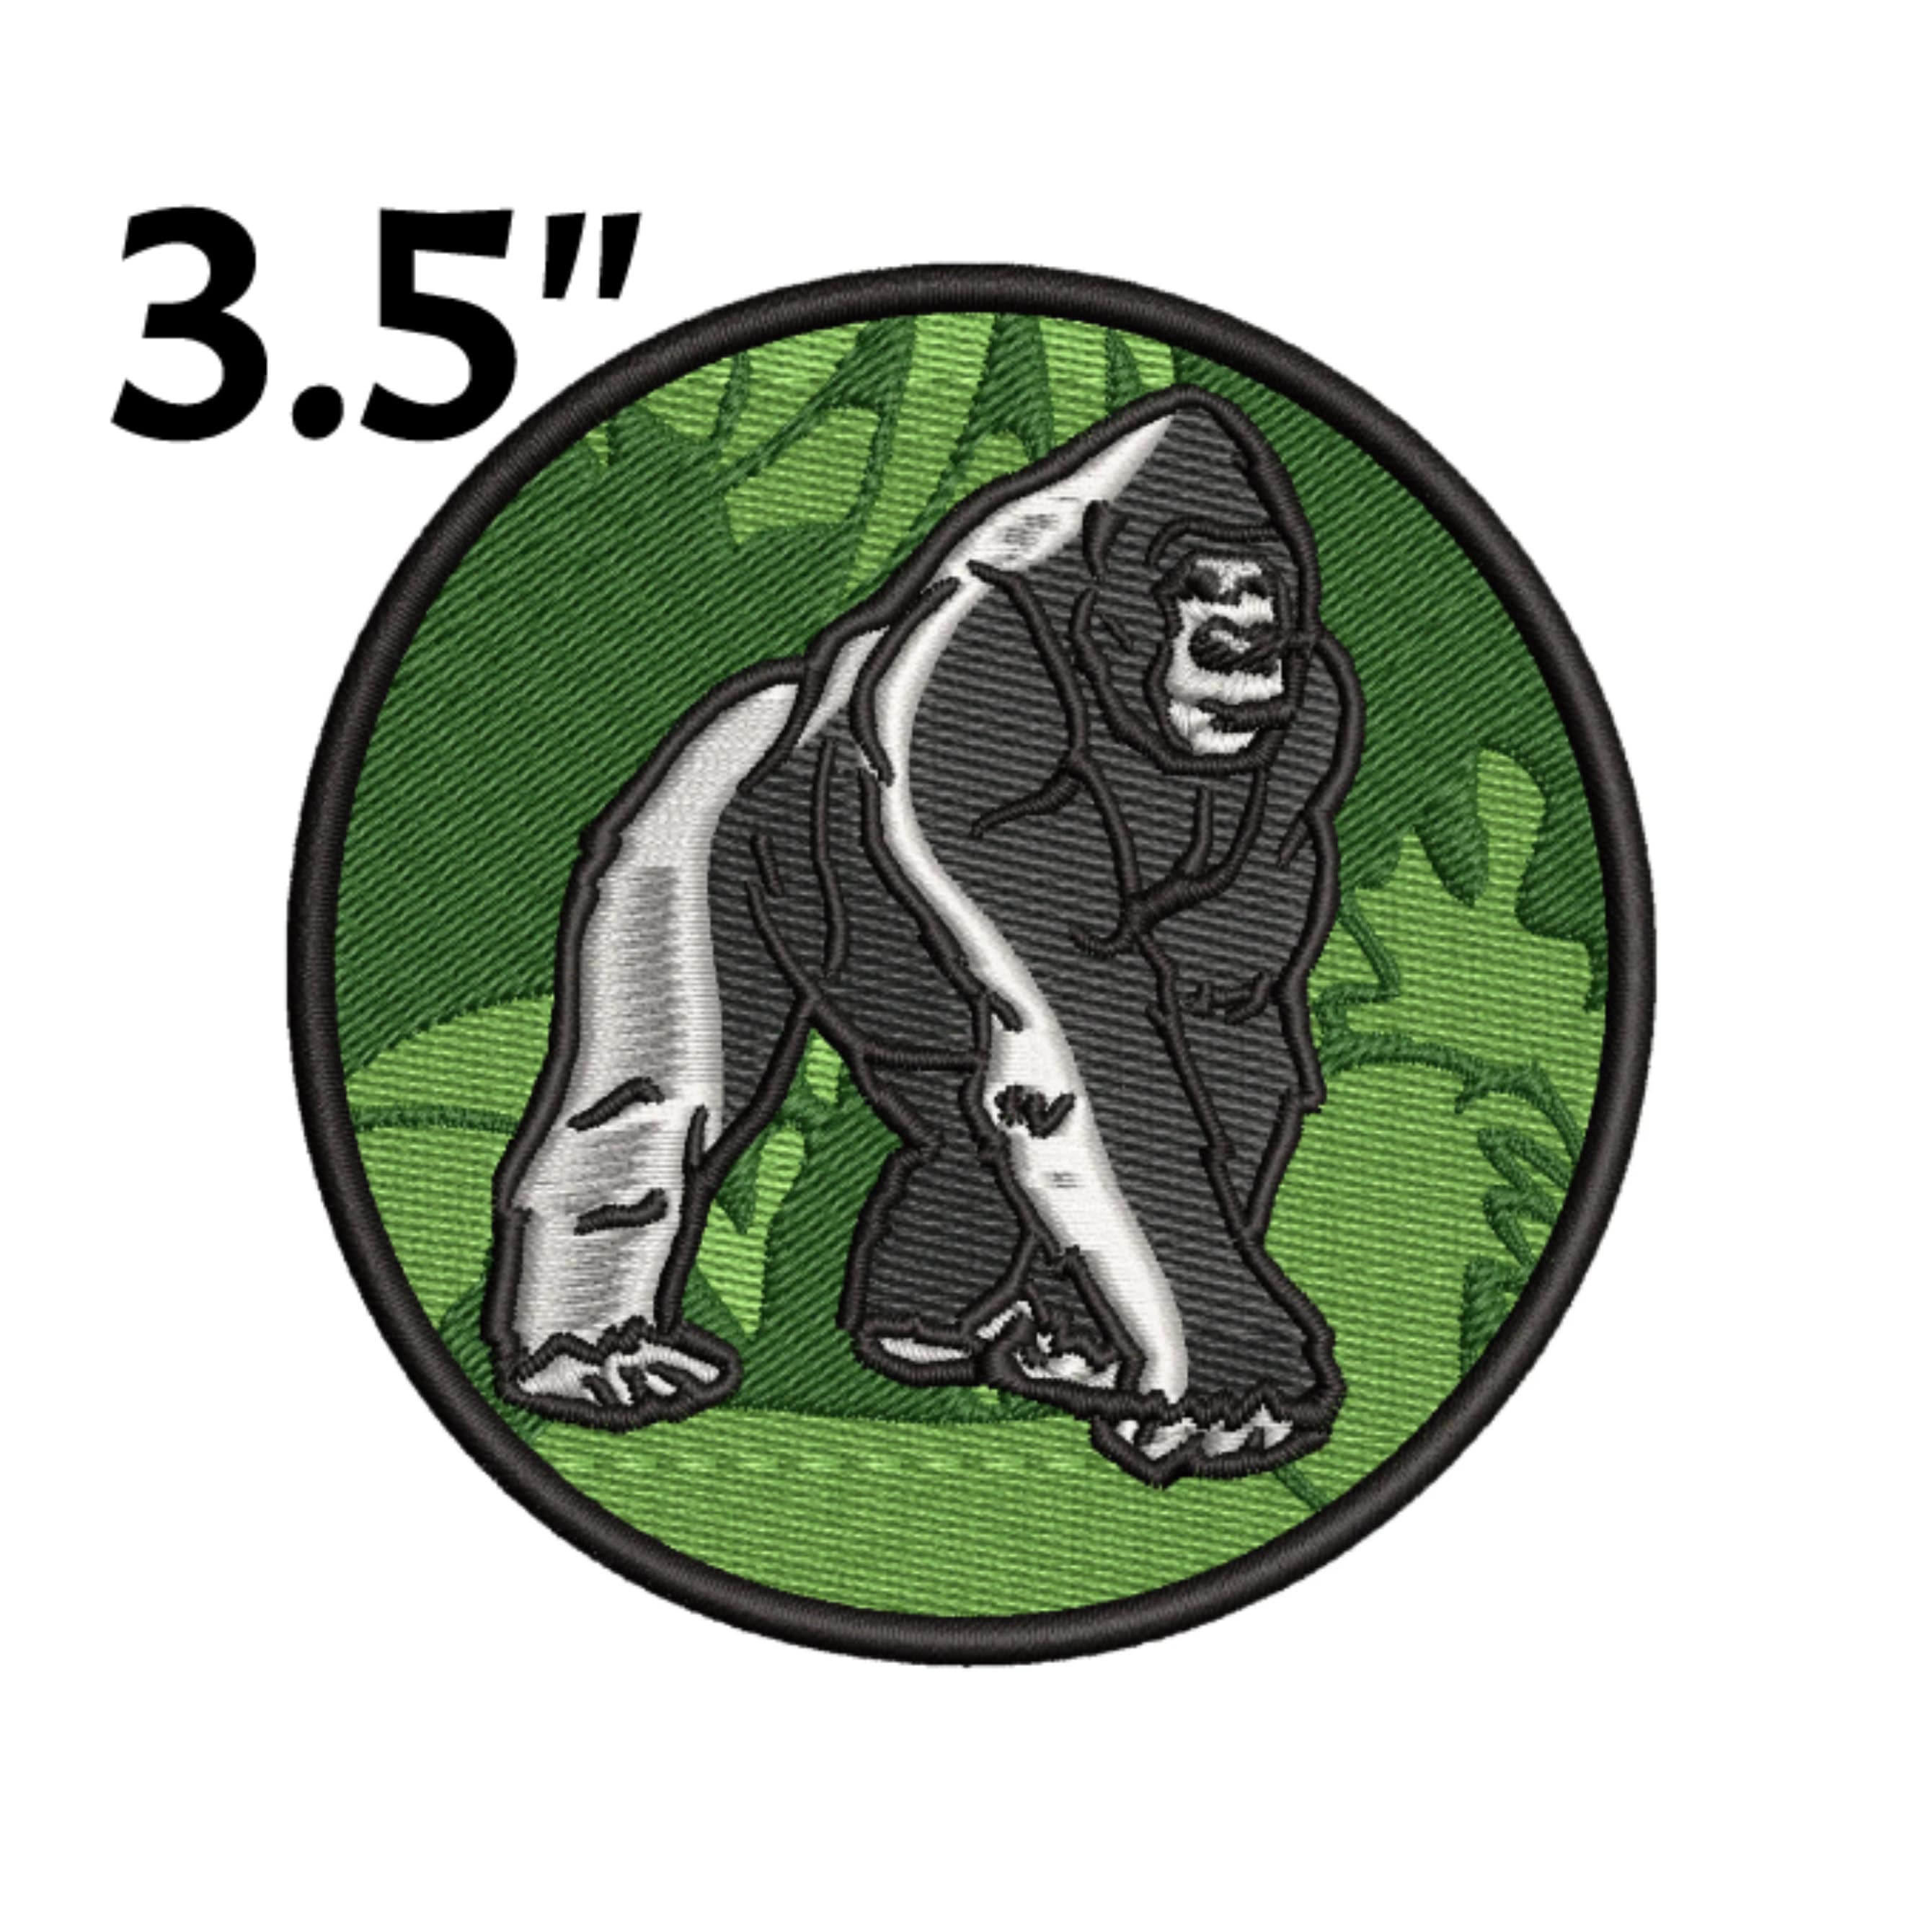 Gorilla gift tags — Test Patch Studio